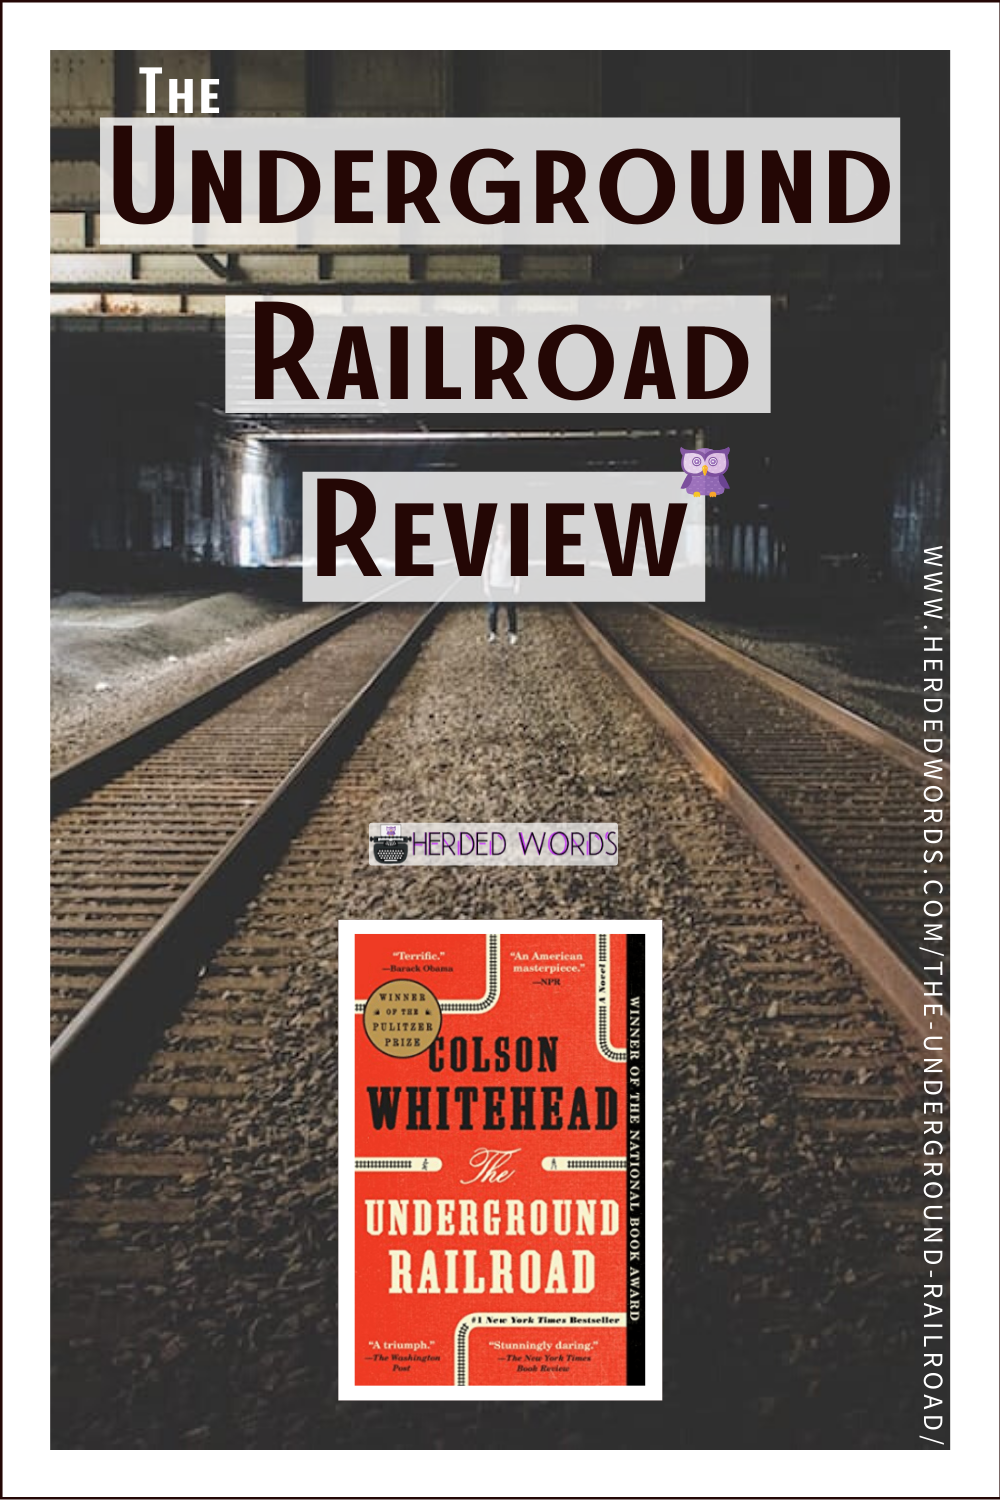 Pin This: Book Review & Analysis of THE UNDERGROUND RAILROAD